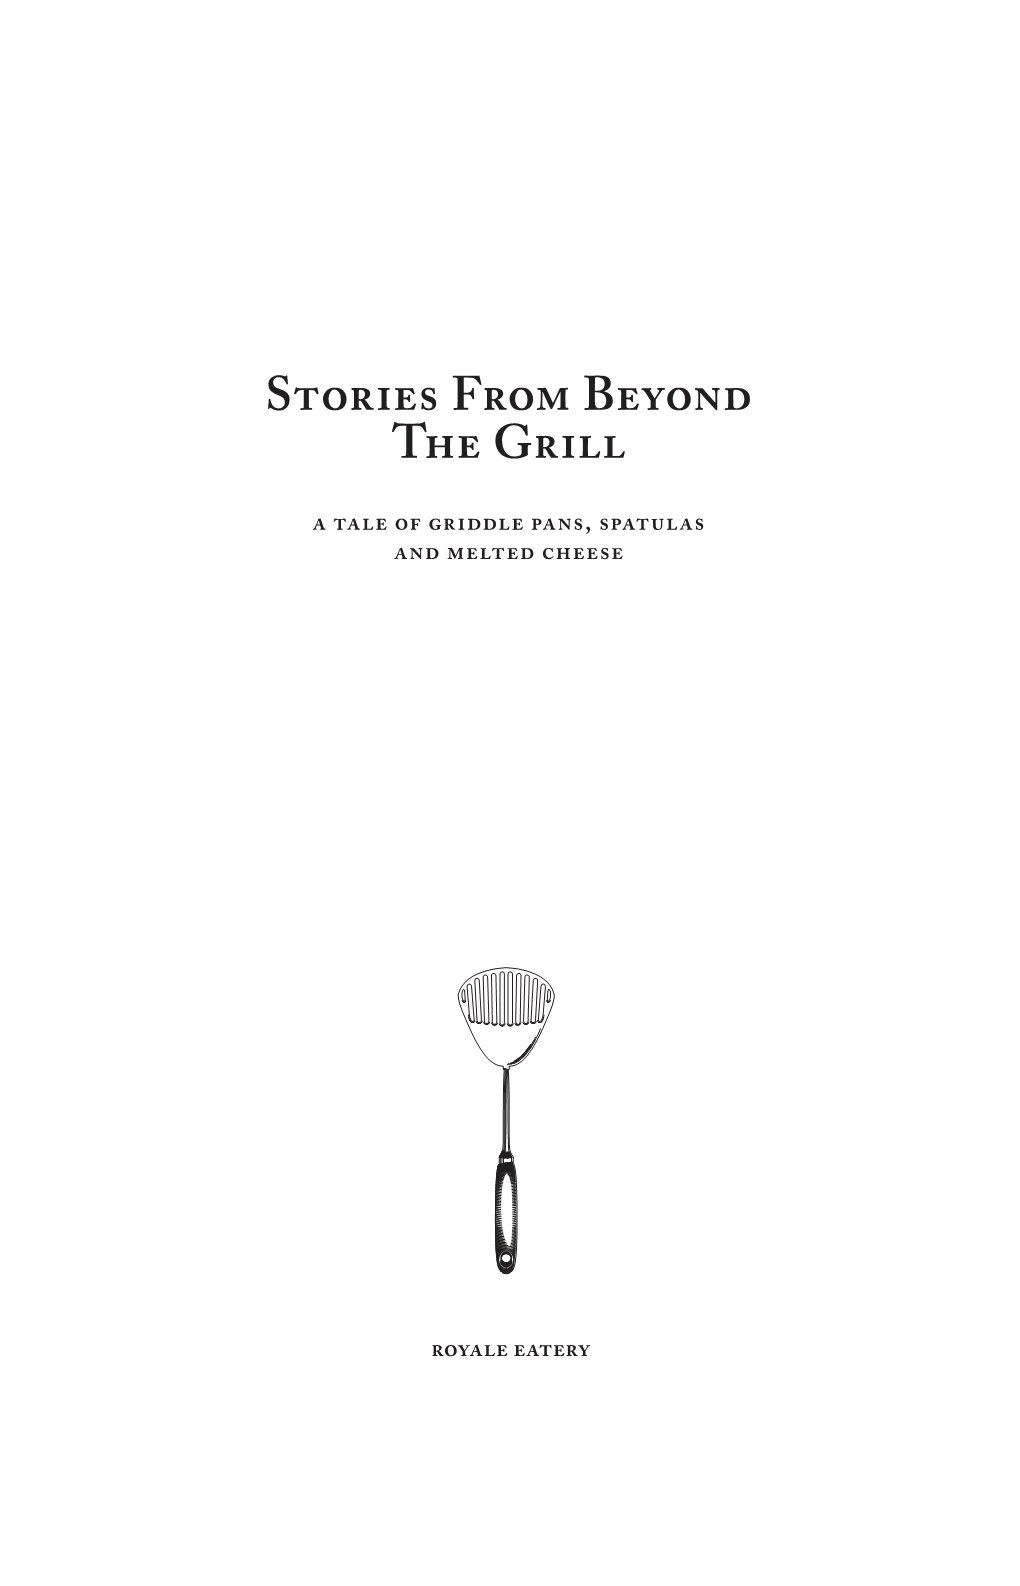 Stories from Beyond the Grill